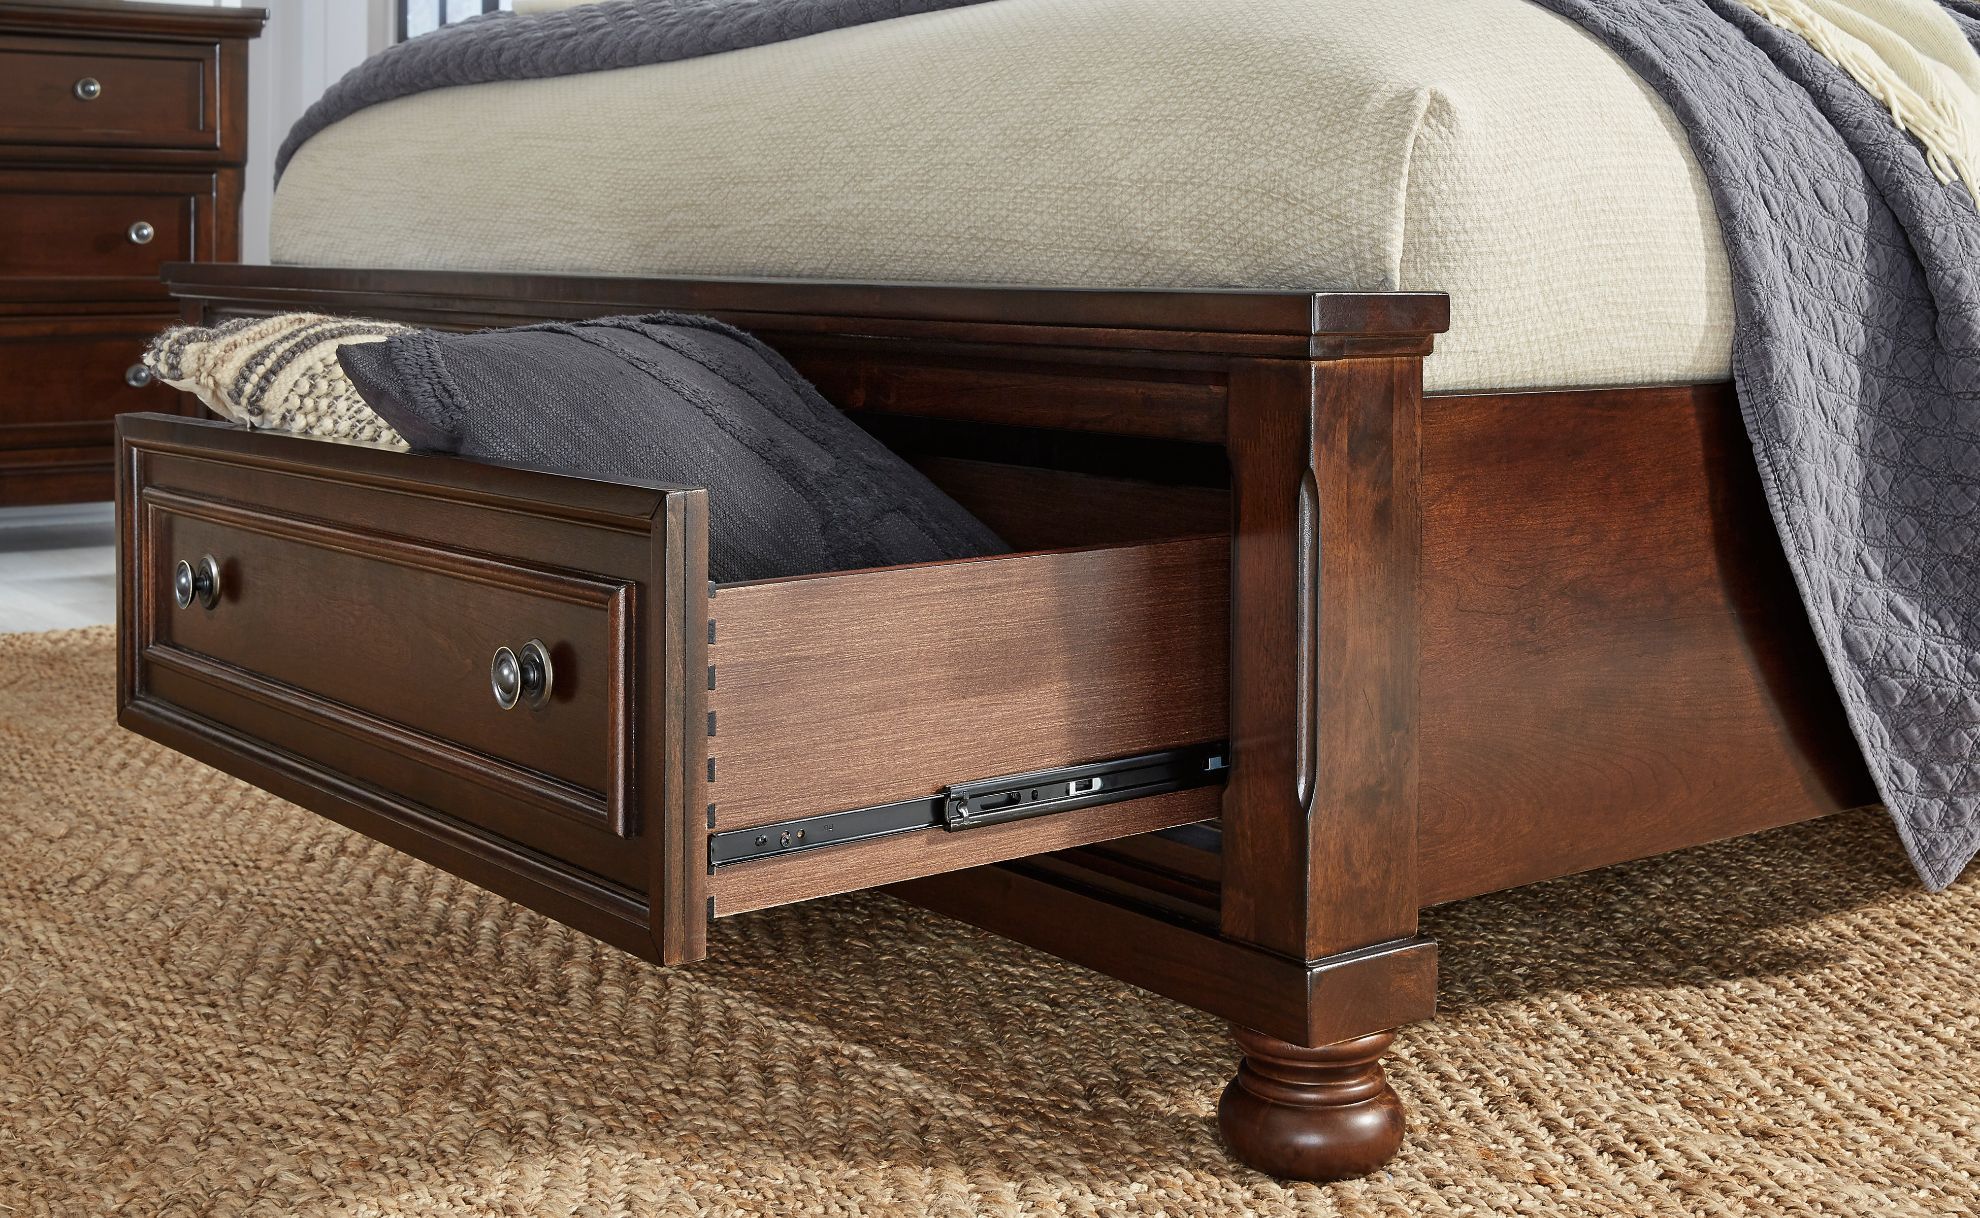 Picture of Porter King Sleigh Storage Bed